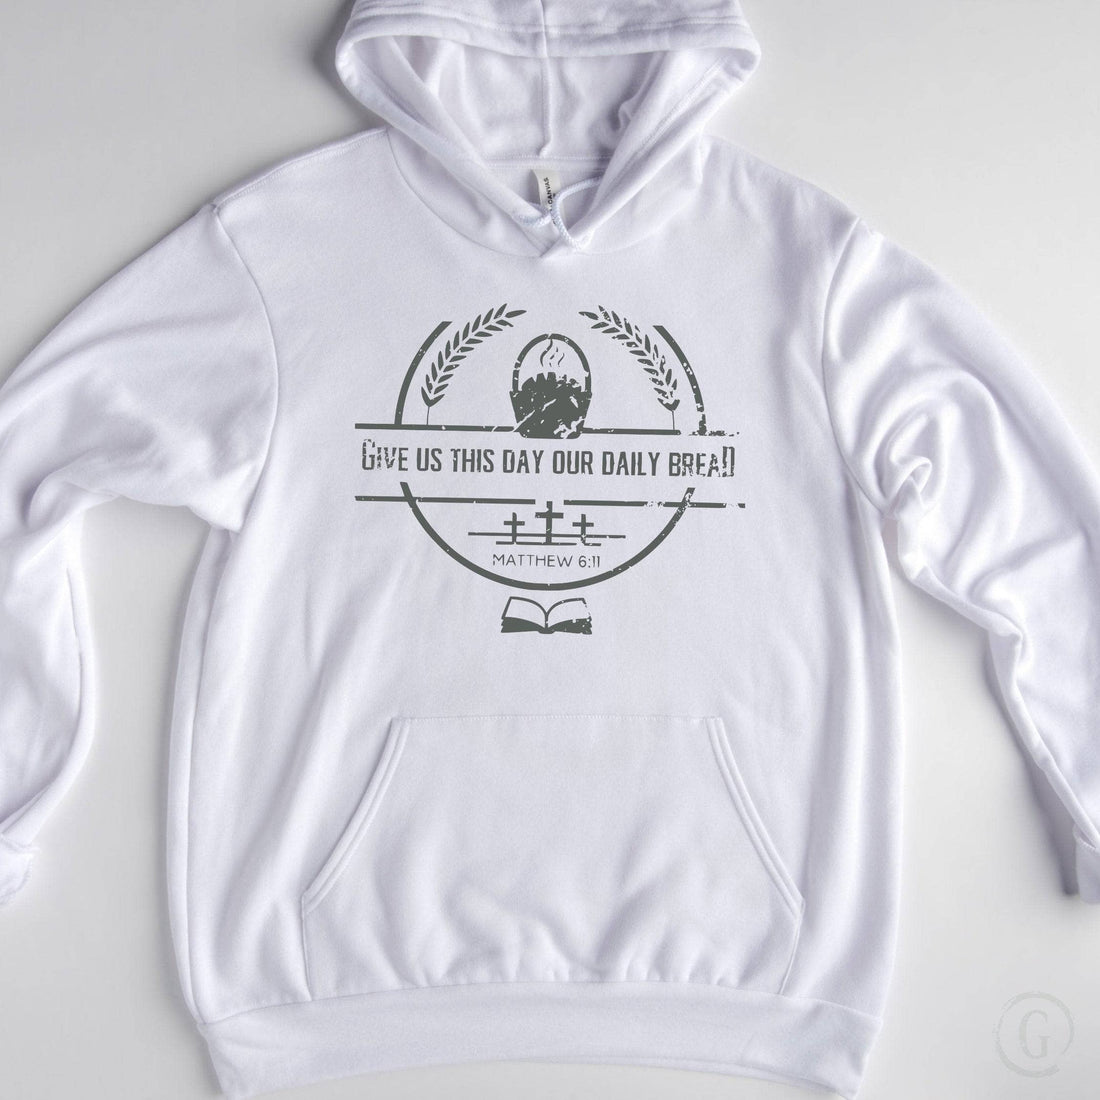 Give Us This Day Our Daily Bread Premium Unisex Pullover Hoodie White